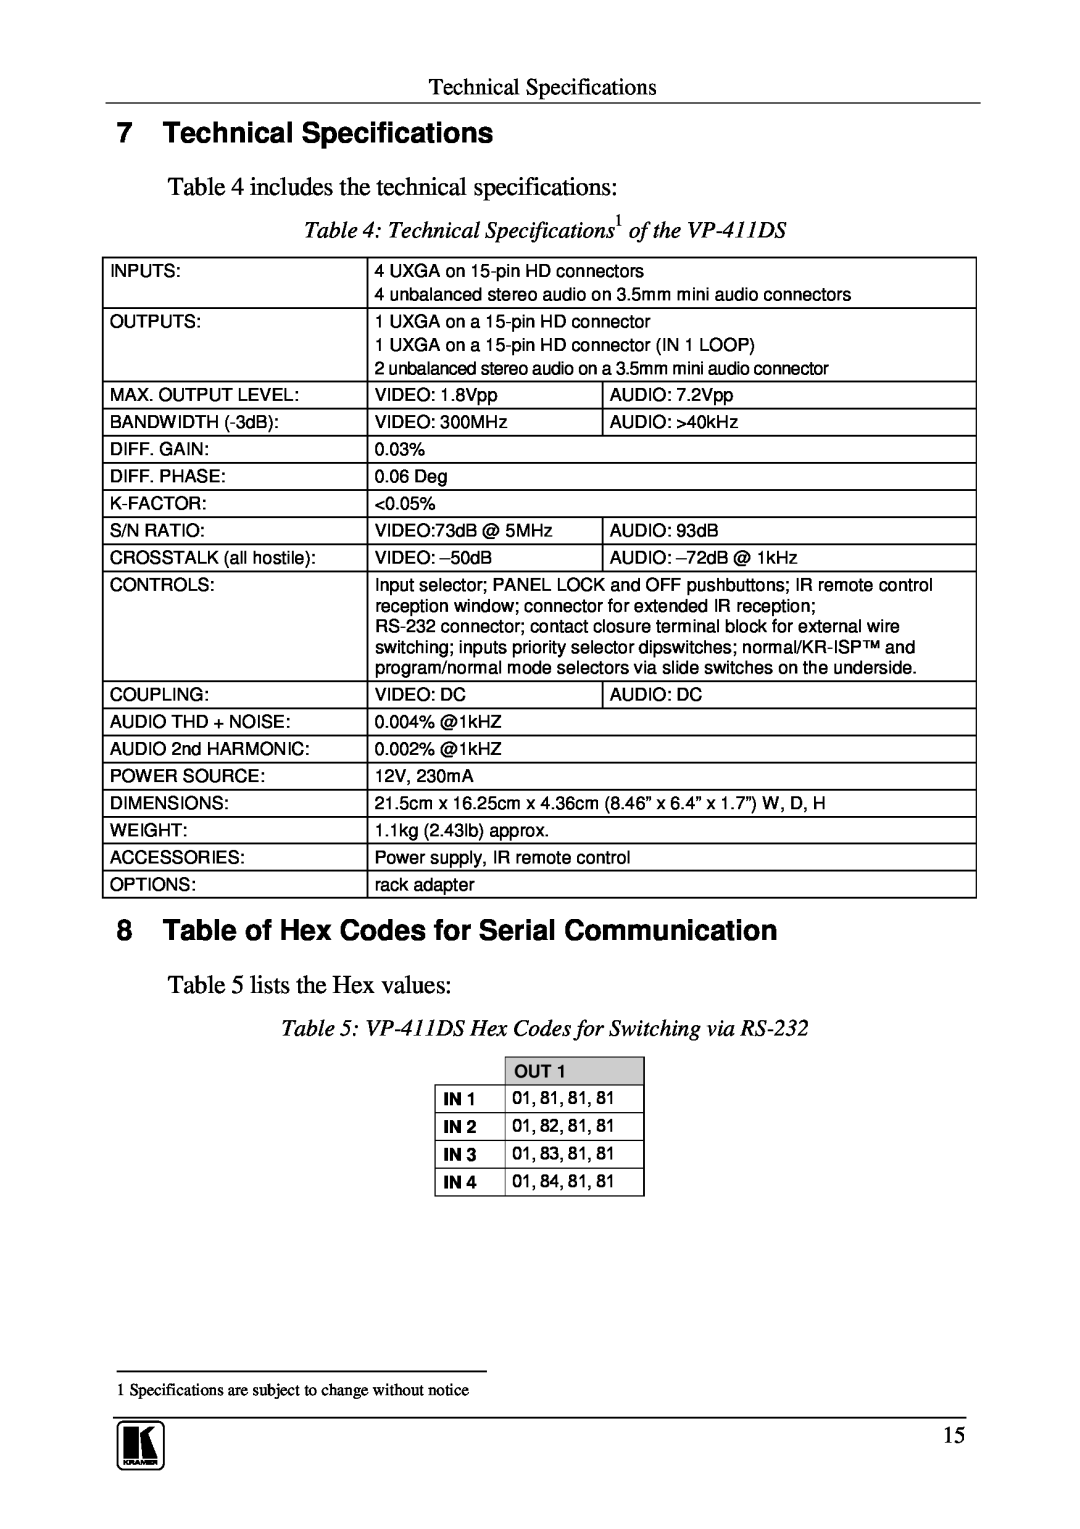 Kramer Electronics VP-411DS Technical Specifications, Table of Hex Codes for Serial Communication, lists the Hex values 